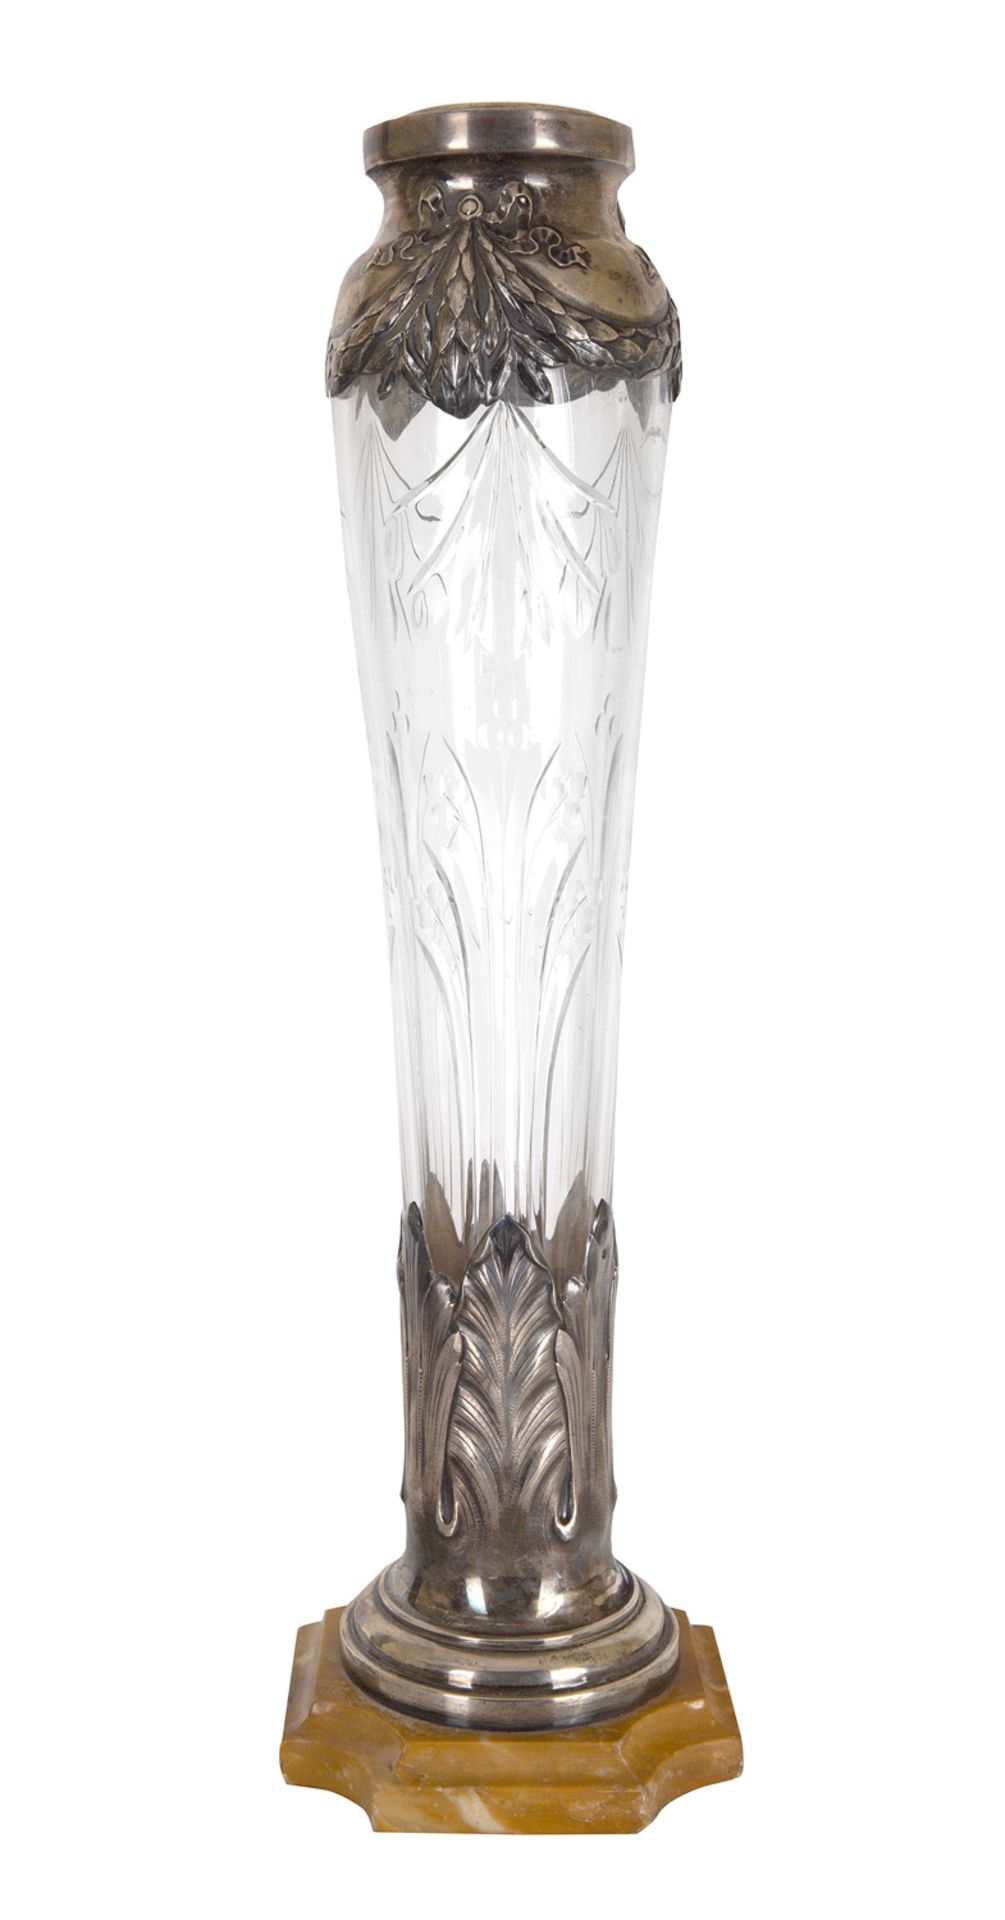 A FRENCH SILVER-MOUNTED CUT CRYSTAL VASE, LIKELY LATE 19TH CENTURY